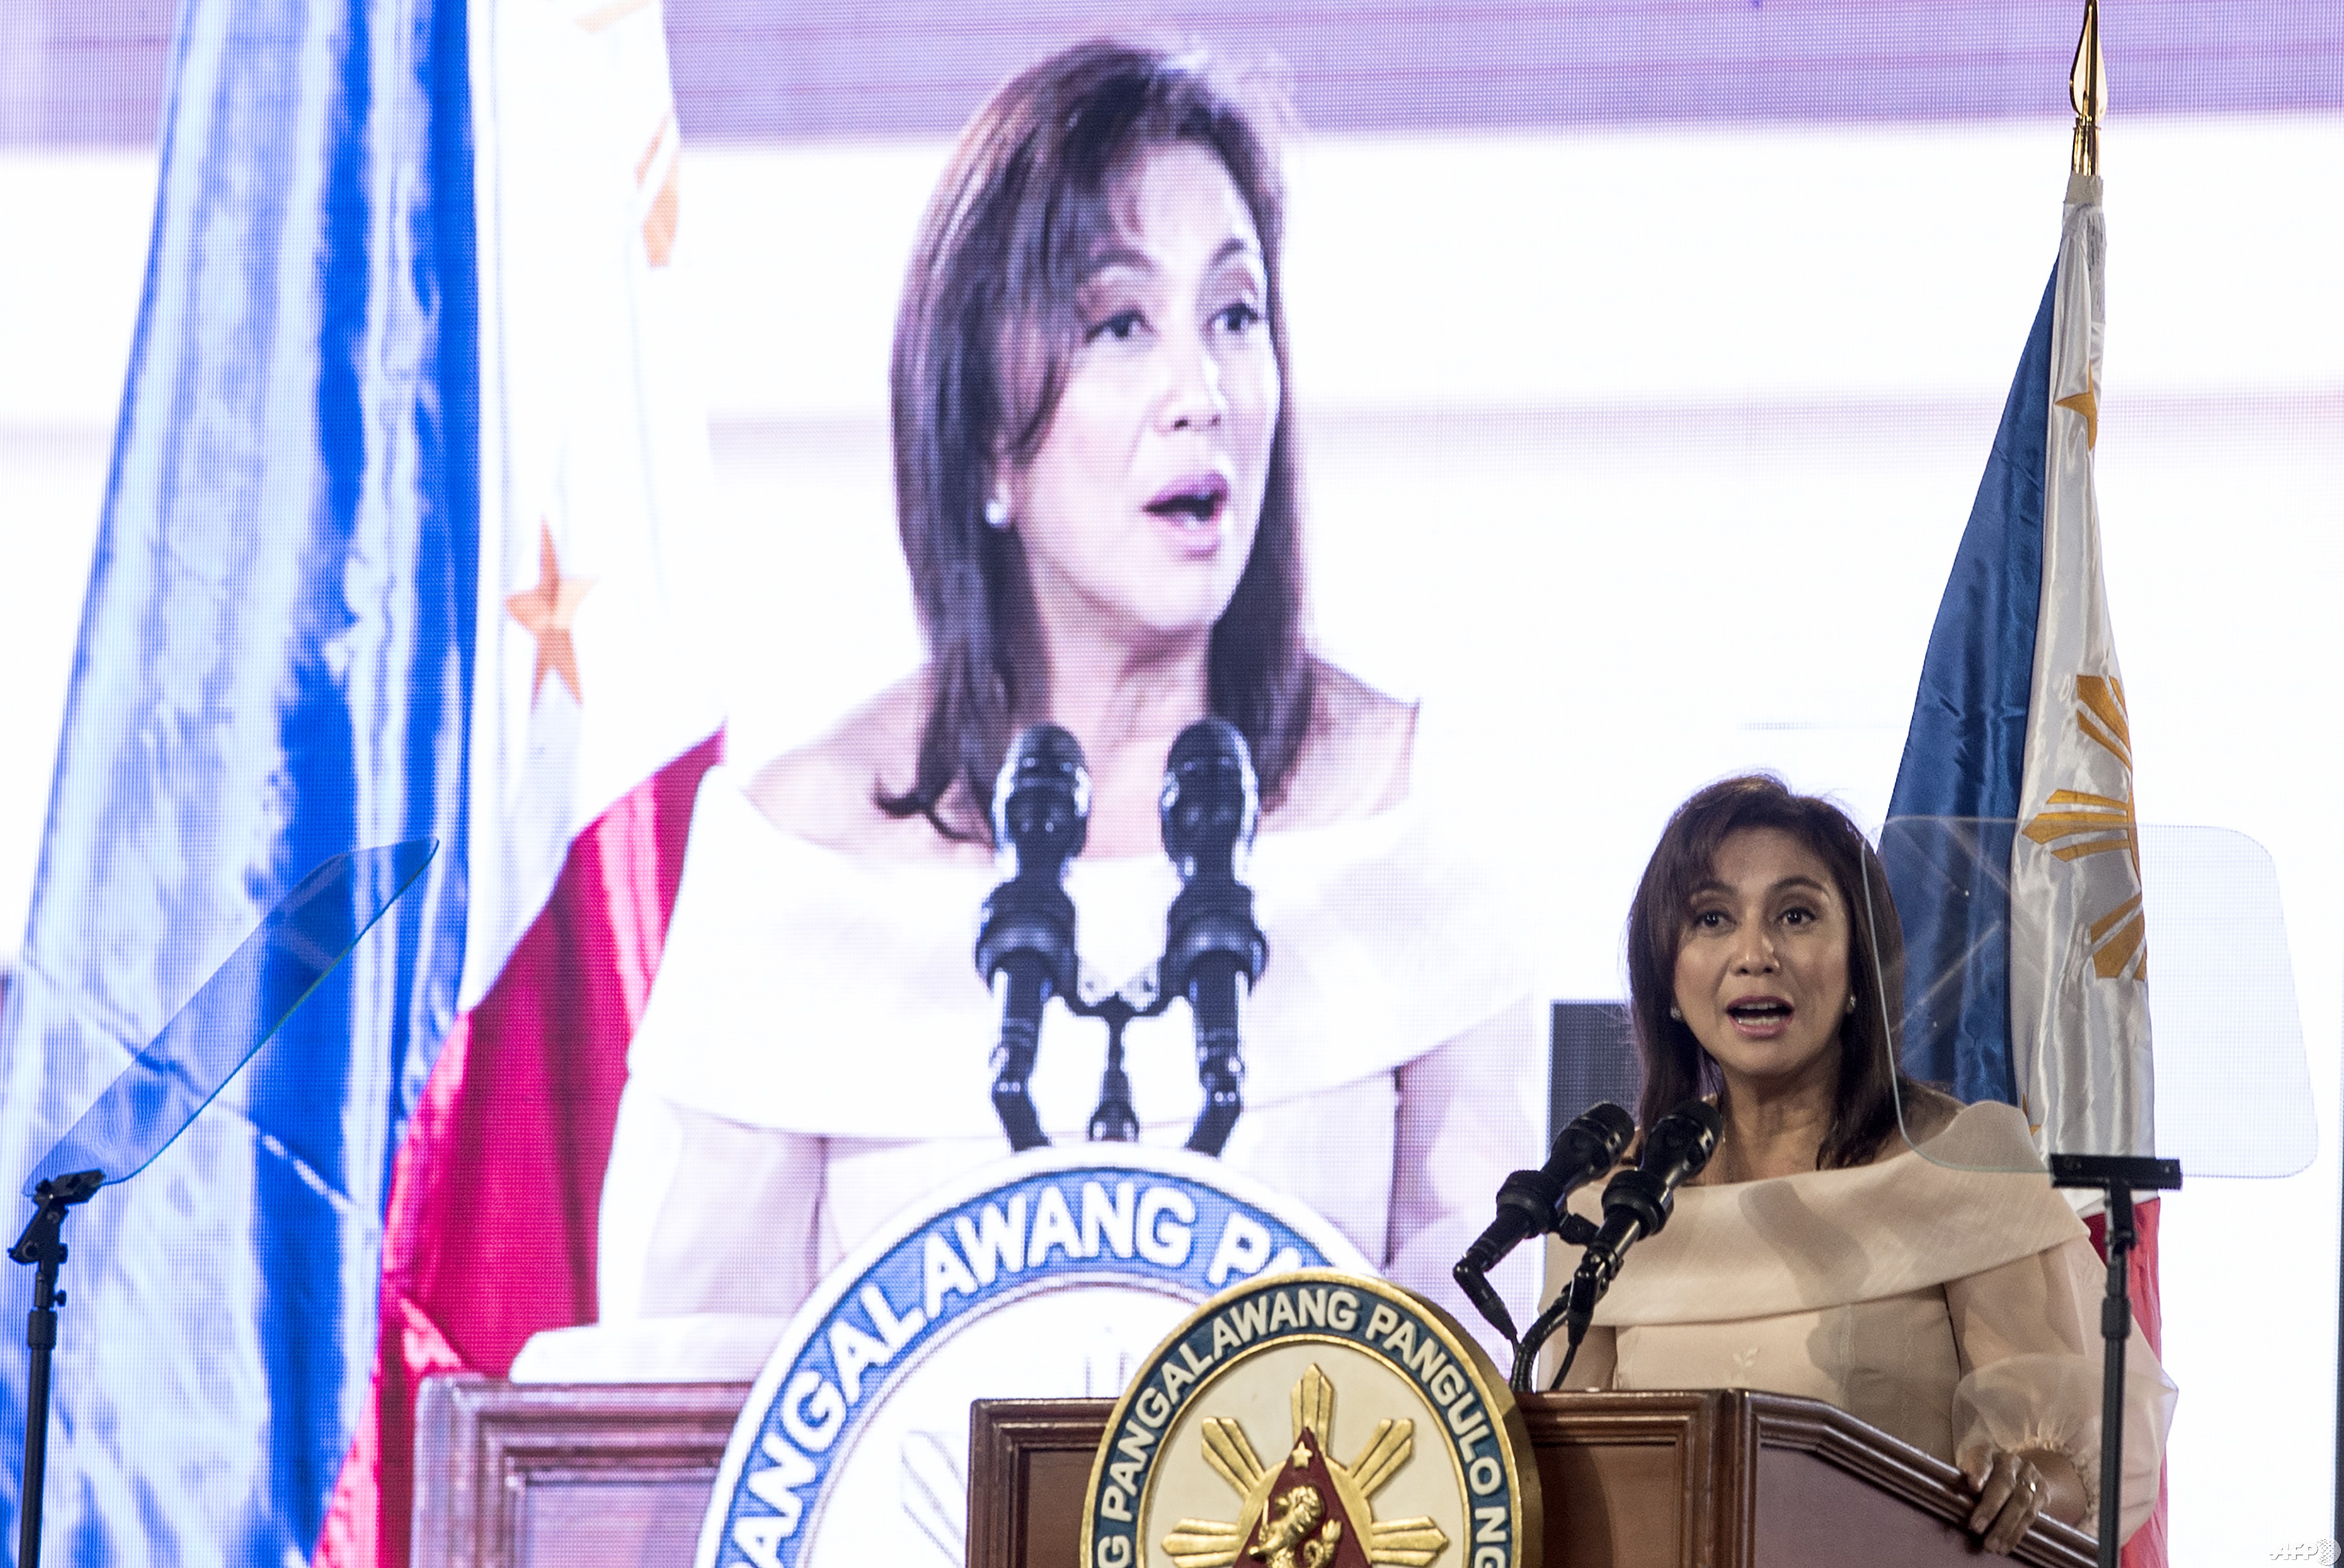 Philippine Vice President Leni Robredo gives a speech during her Inauguration ceremonies at the Quezon City Recepotion House in Manila on June 30, 2016. / AFP PHOTO / NOEL CELIS